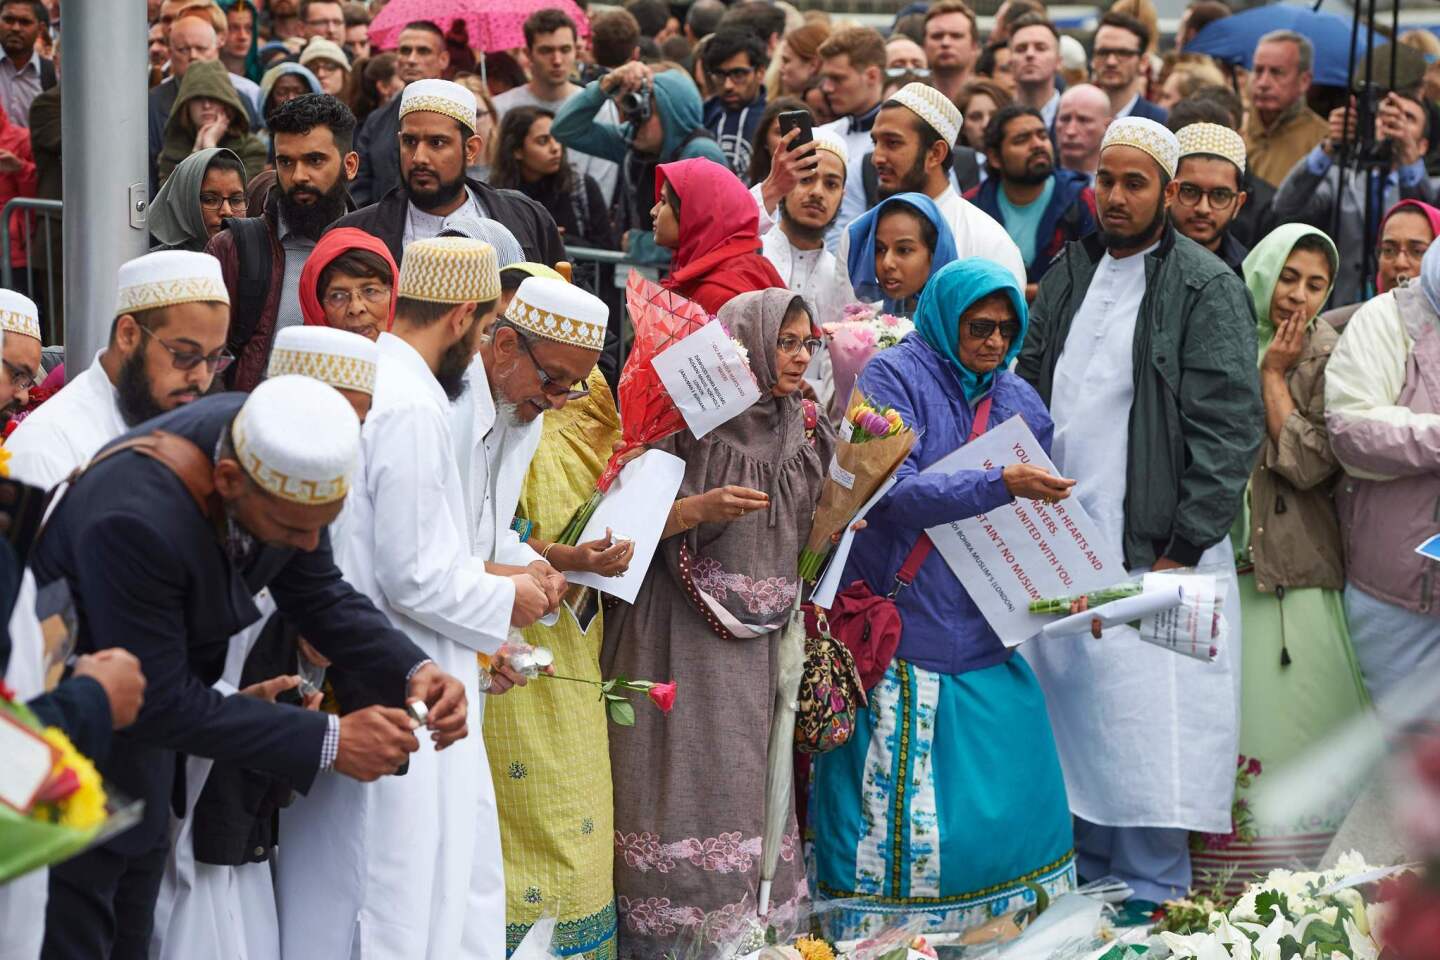 Members of the Dawoodi Bohra Muslim community join others as they lay flowers during a vigil at Potters Fields Park in London.